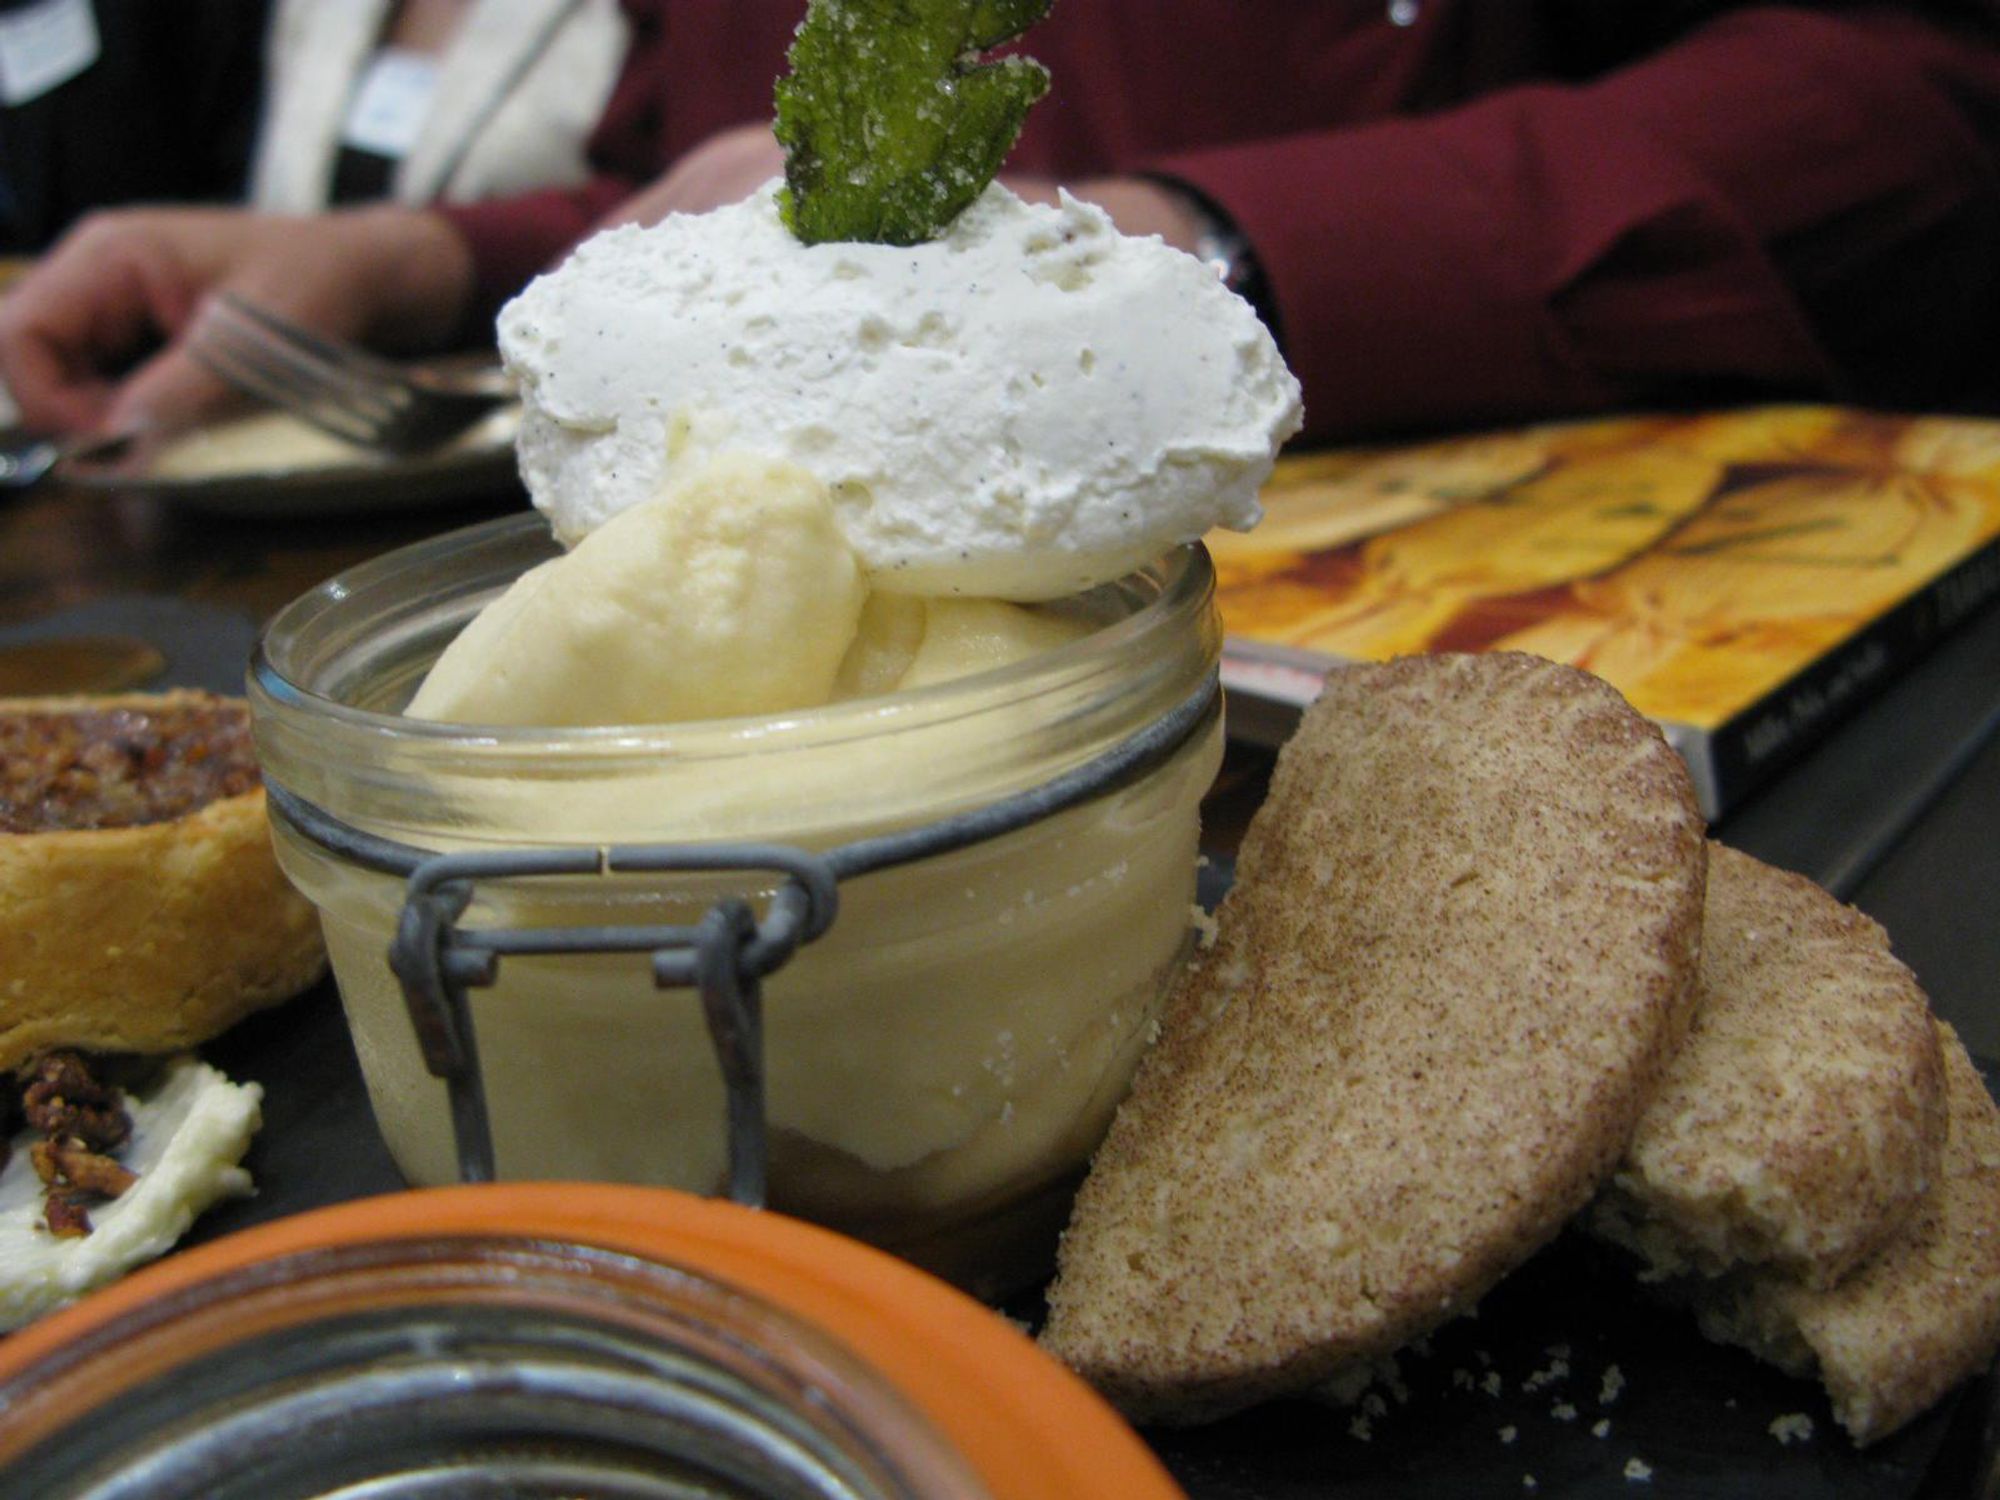 Sky Canyon's butterscotch pudding comes topped with vanilla whipped cream and a sugared mint leaf.